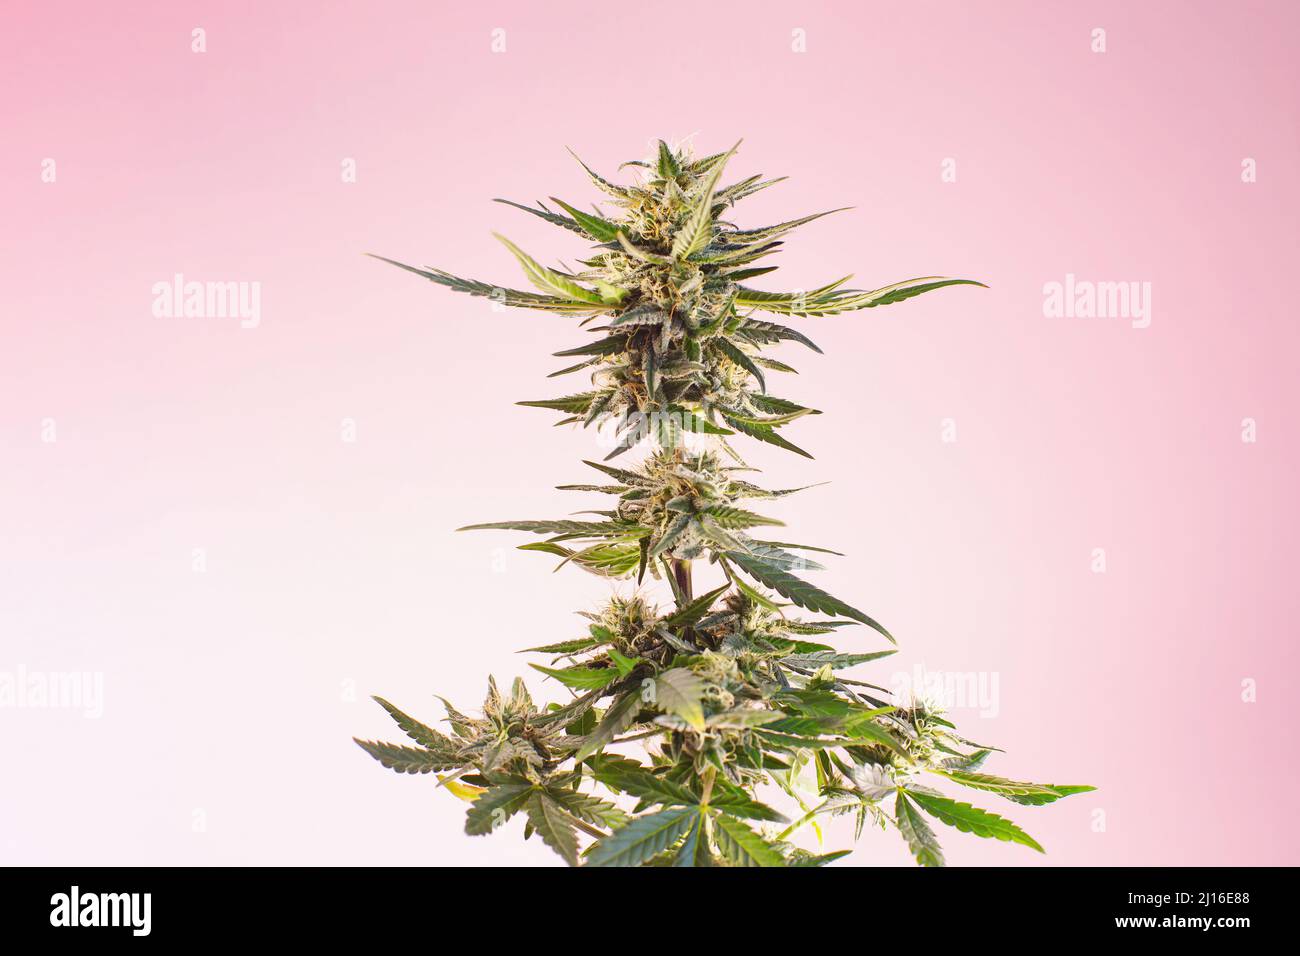 Cannabis medicinal plant on a light beige pink background. Flowering cannabis marijuana hemp at new modern and aesthetic style for medical and cosmeti Stock Photo